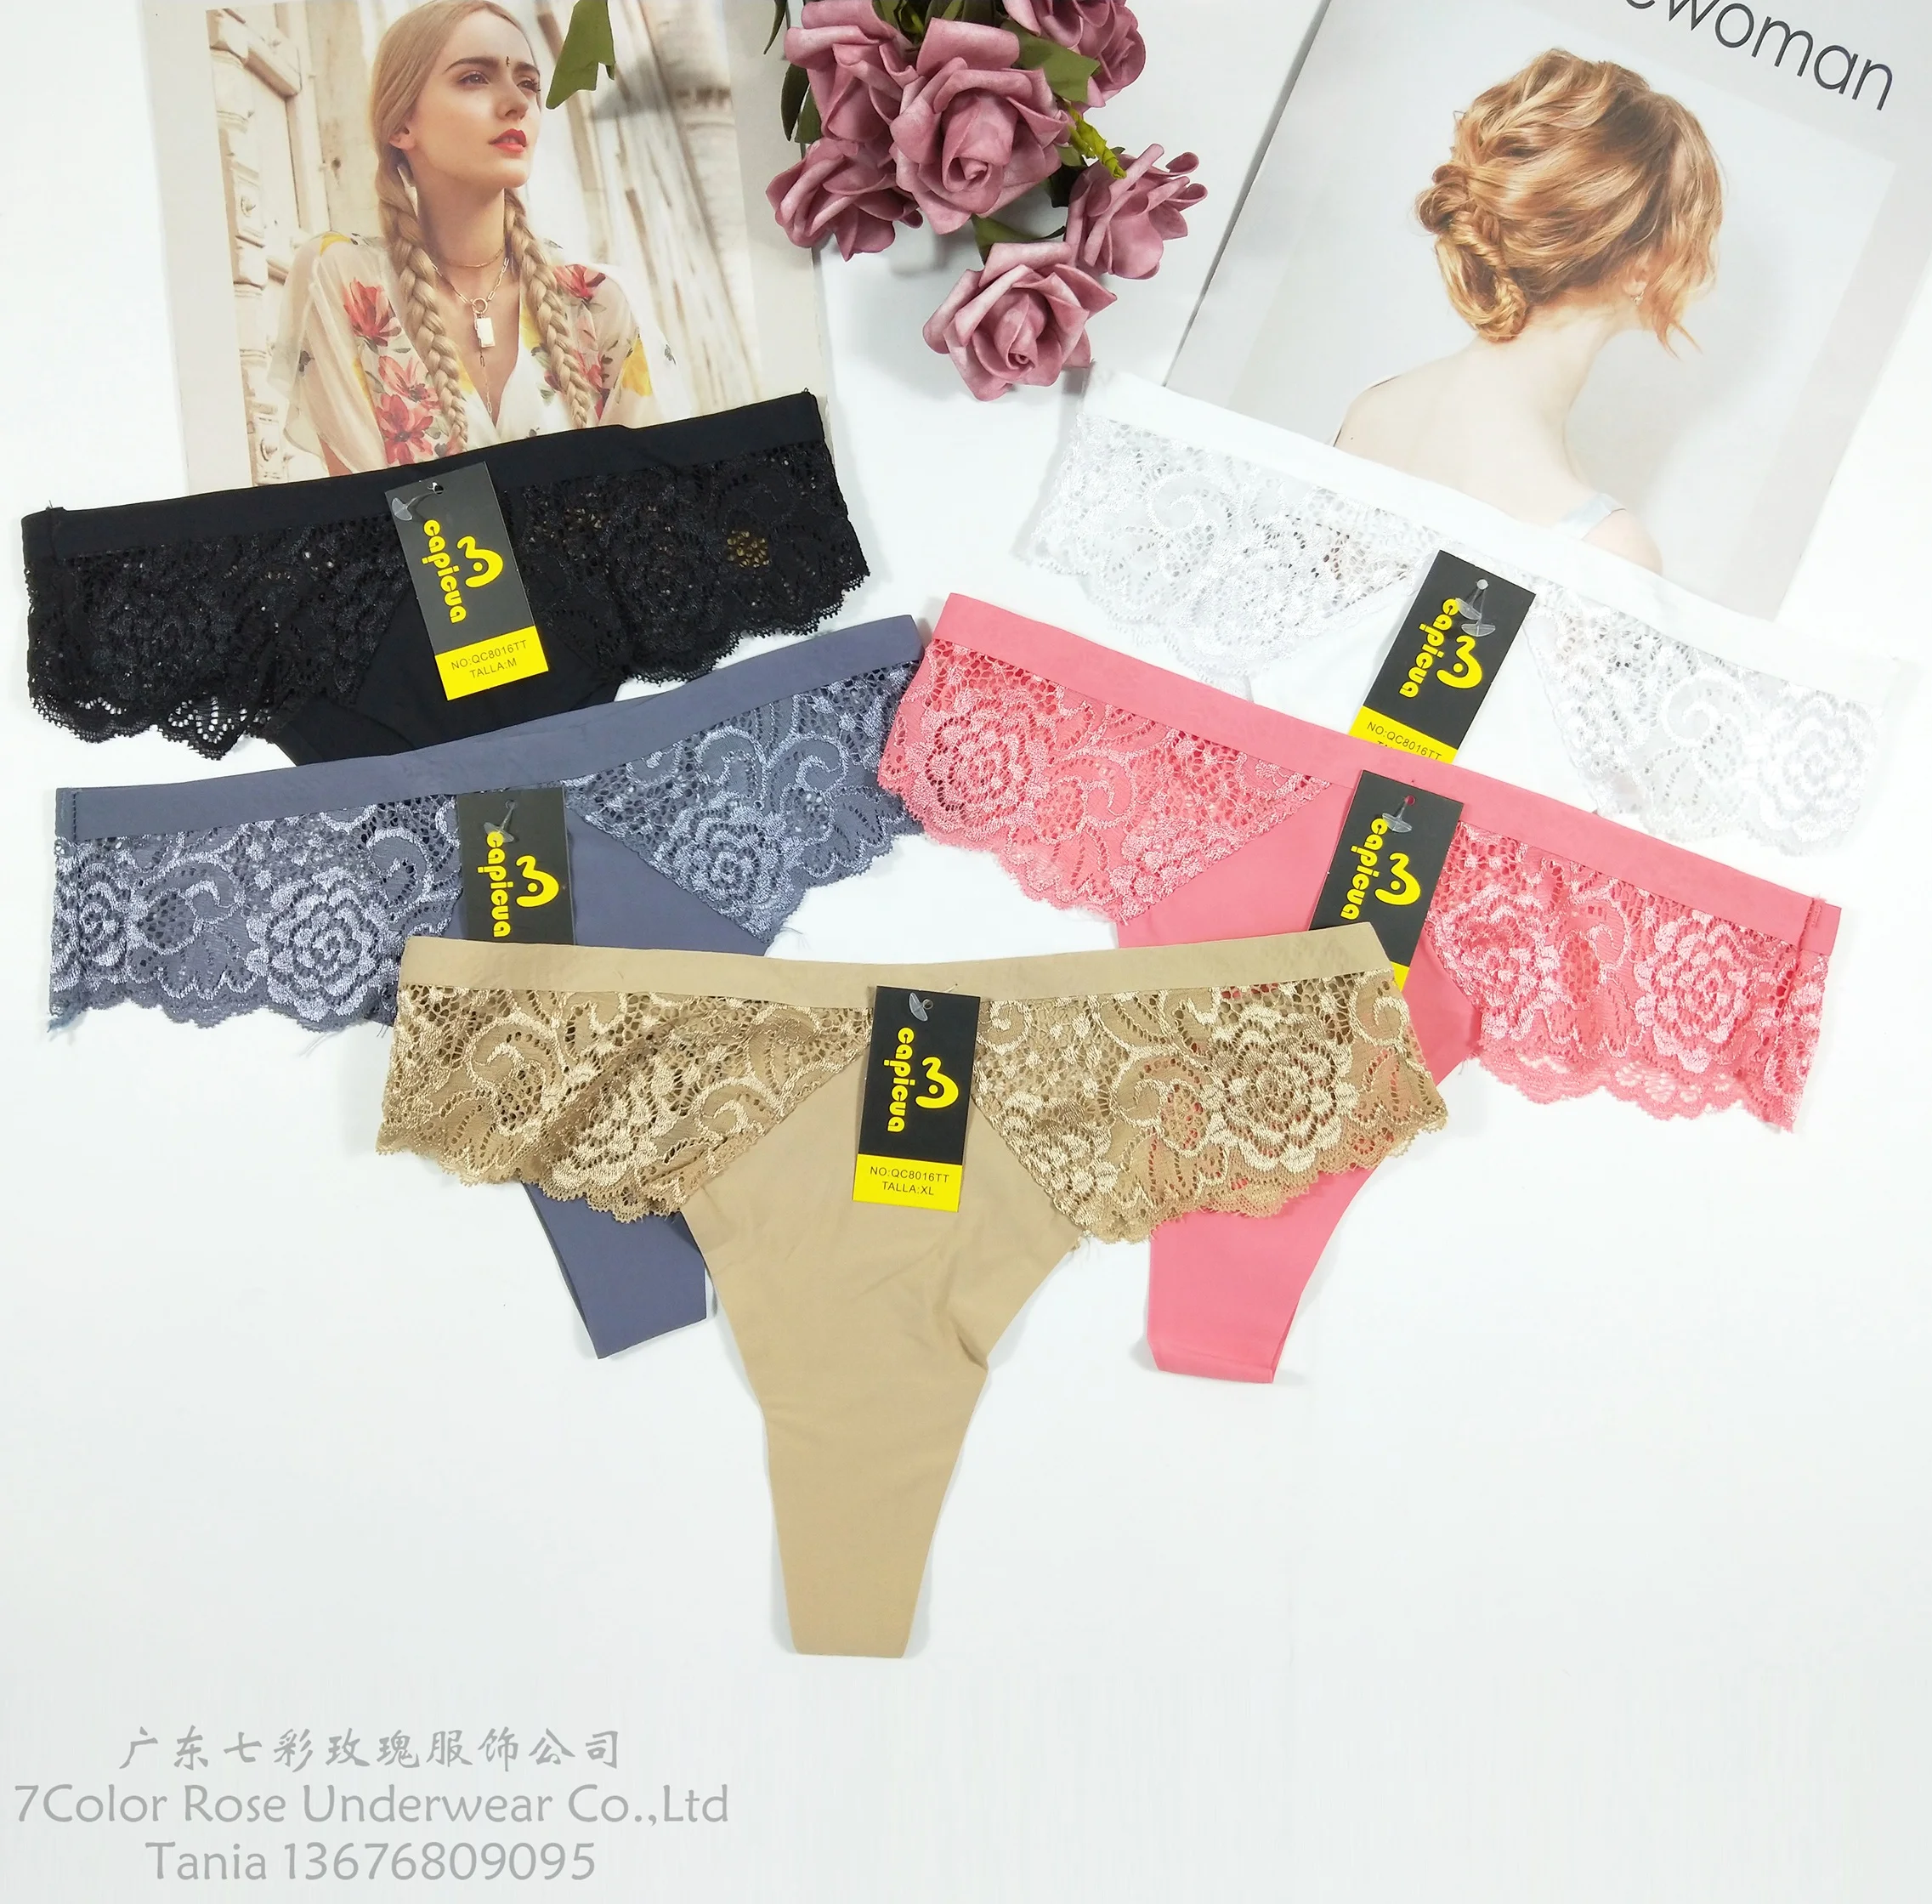 

Factory Outlet New T-back Thongs Panties for Women Decorated with Lace Accept OEM 1pc/polybag Adults POLYAMIDE/SPANDEX